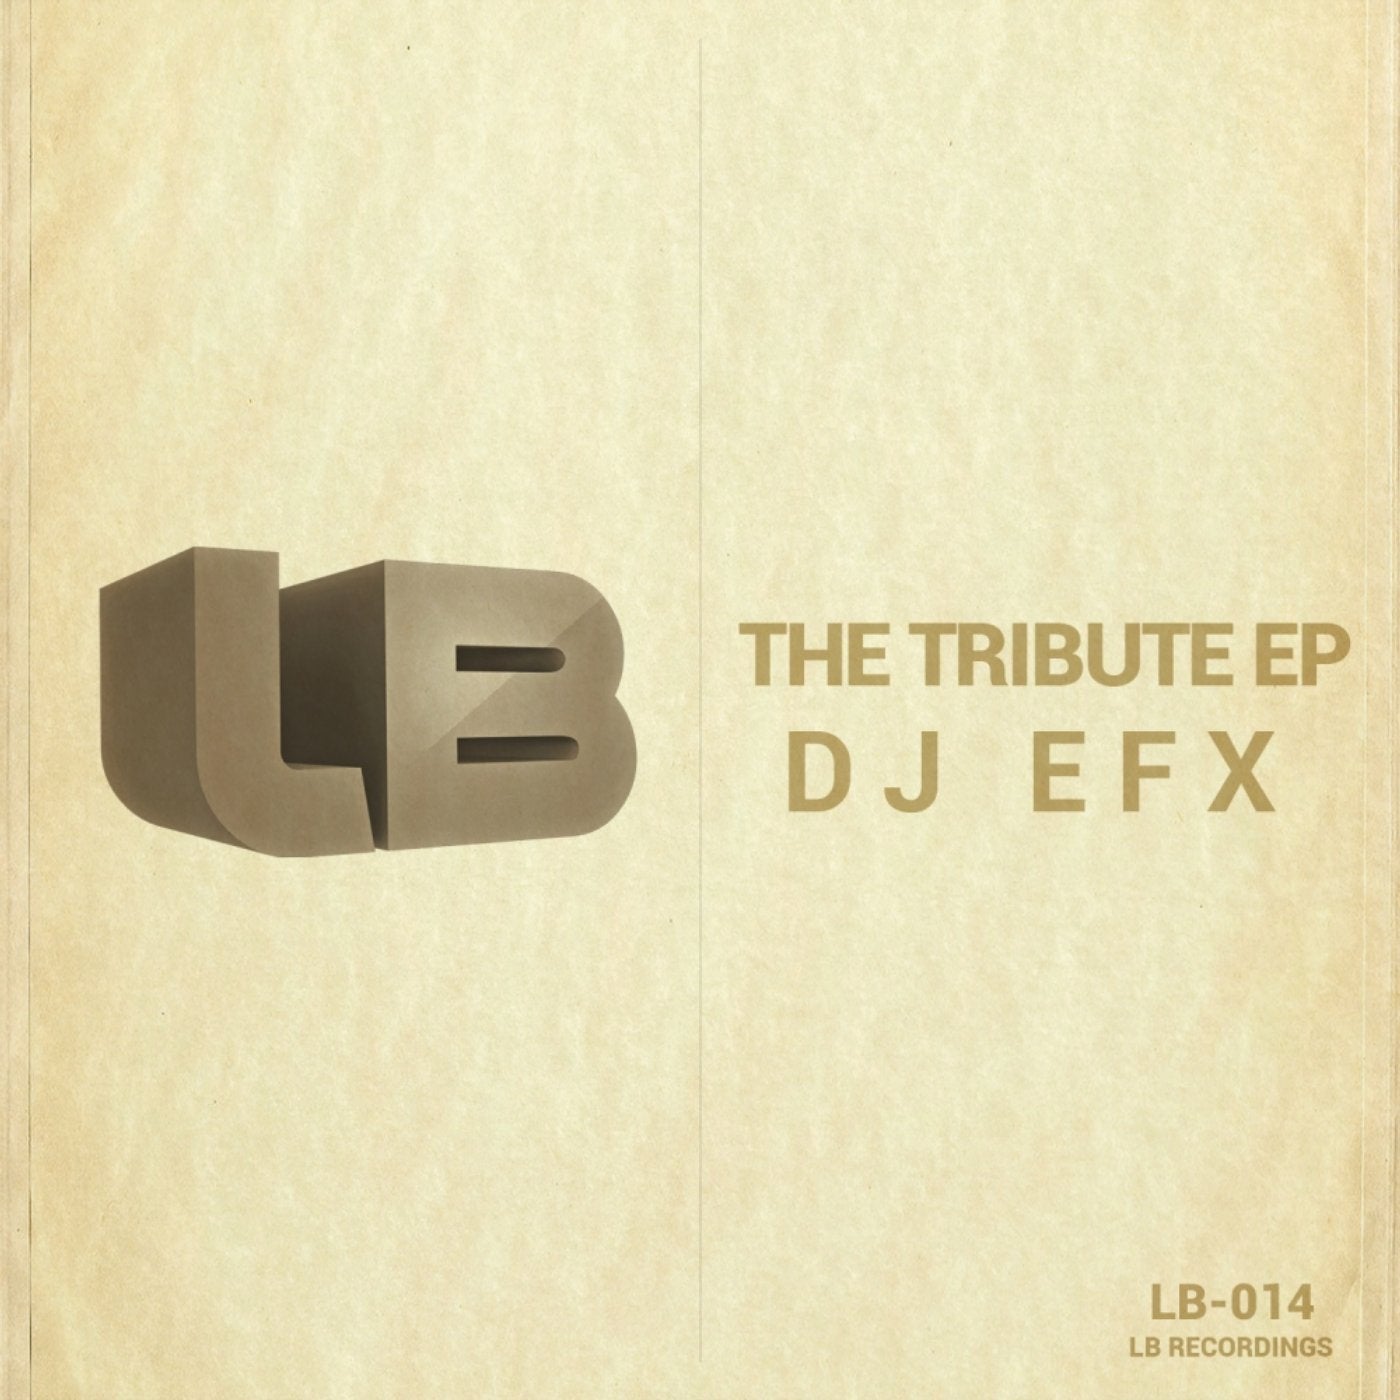 The Tribute EP